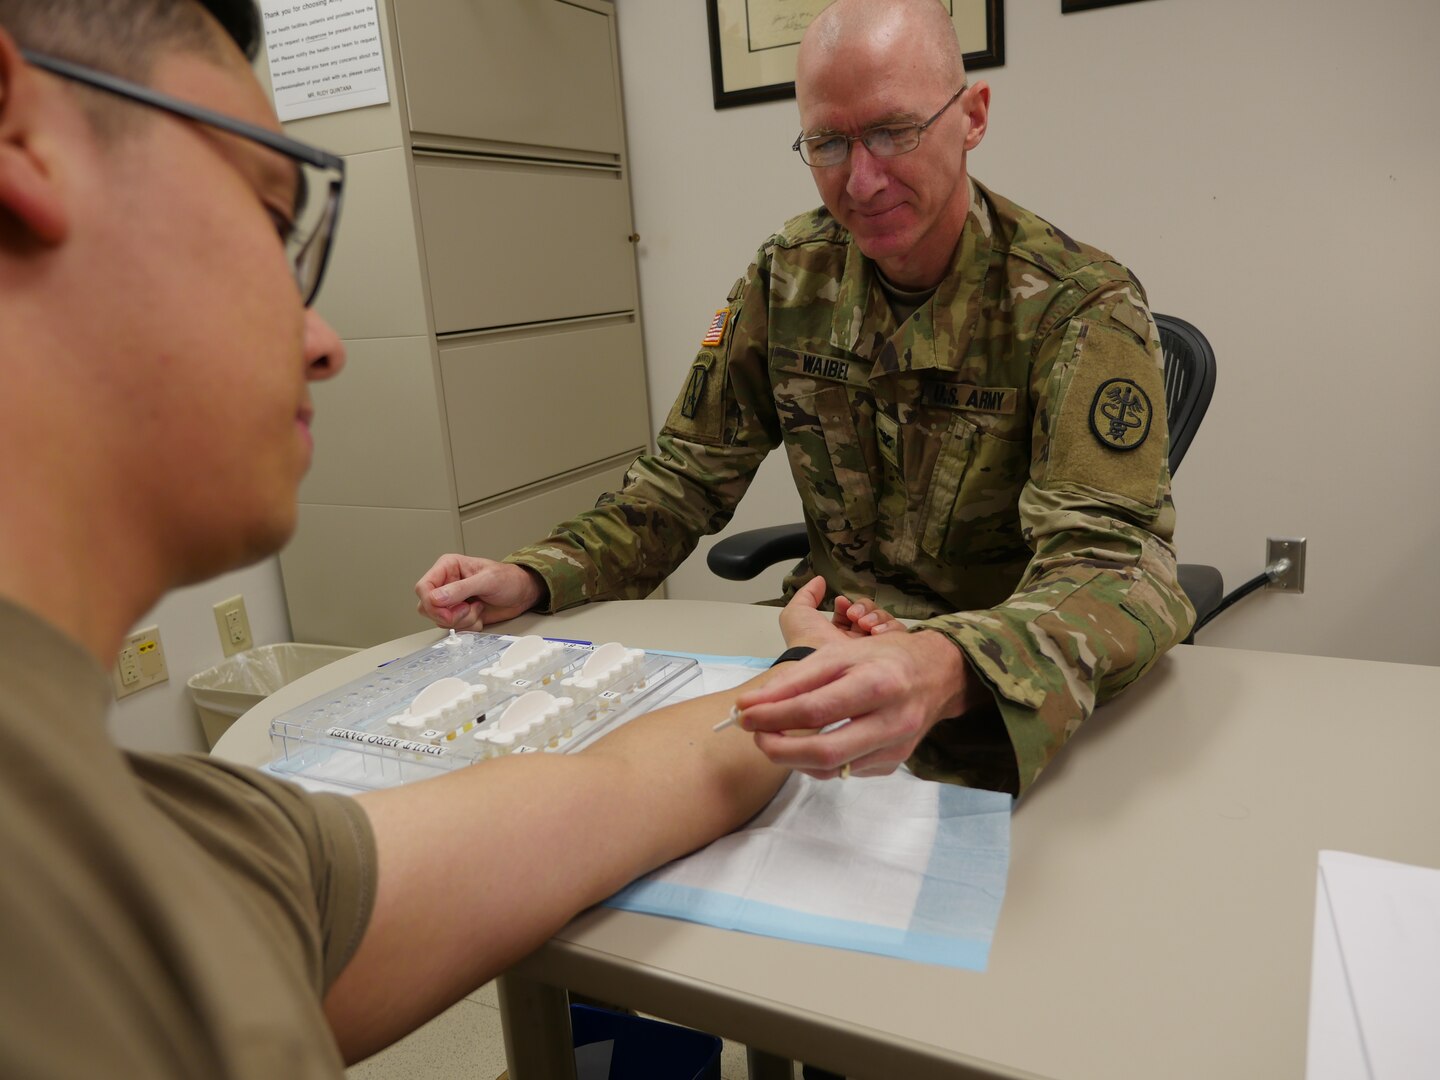 Army Col. (Dr.) Kirk Waibel, allergist/immunologist, prepares to give a mountain cedar allergy test to Army Sgt. Javier Pacheco in the Allergy/Immunology Clinic at Brooke Army Medical Center Oct. 8. Mountain cedar is one of the most common allergens in central and south Texas.